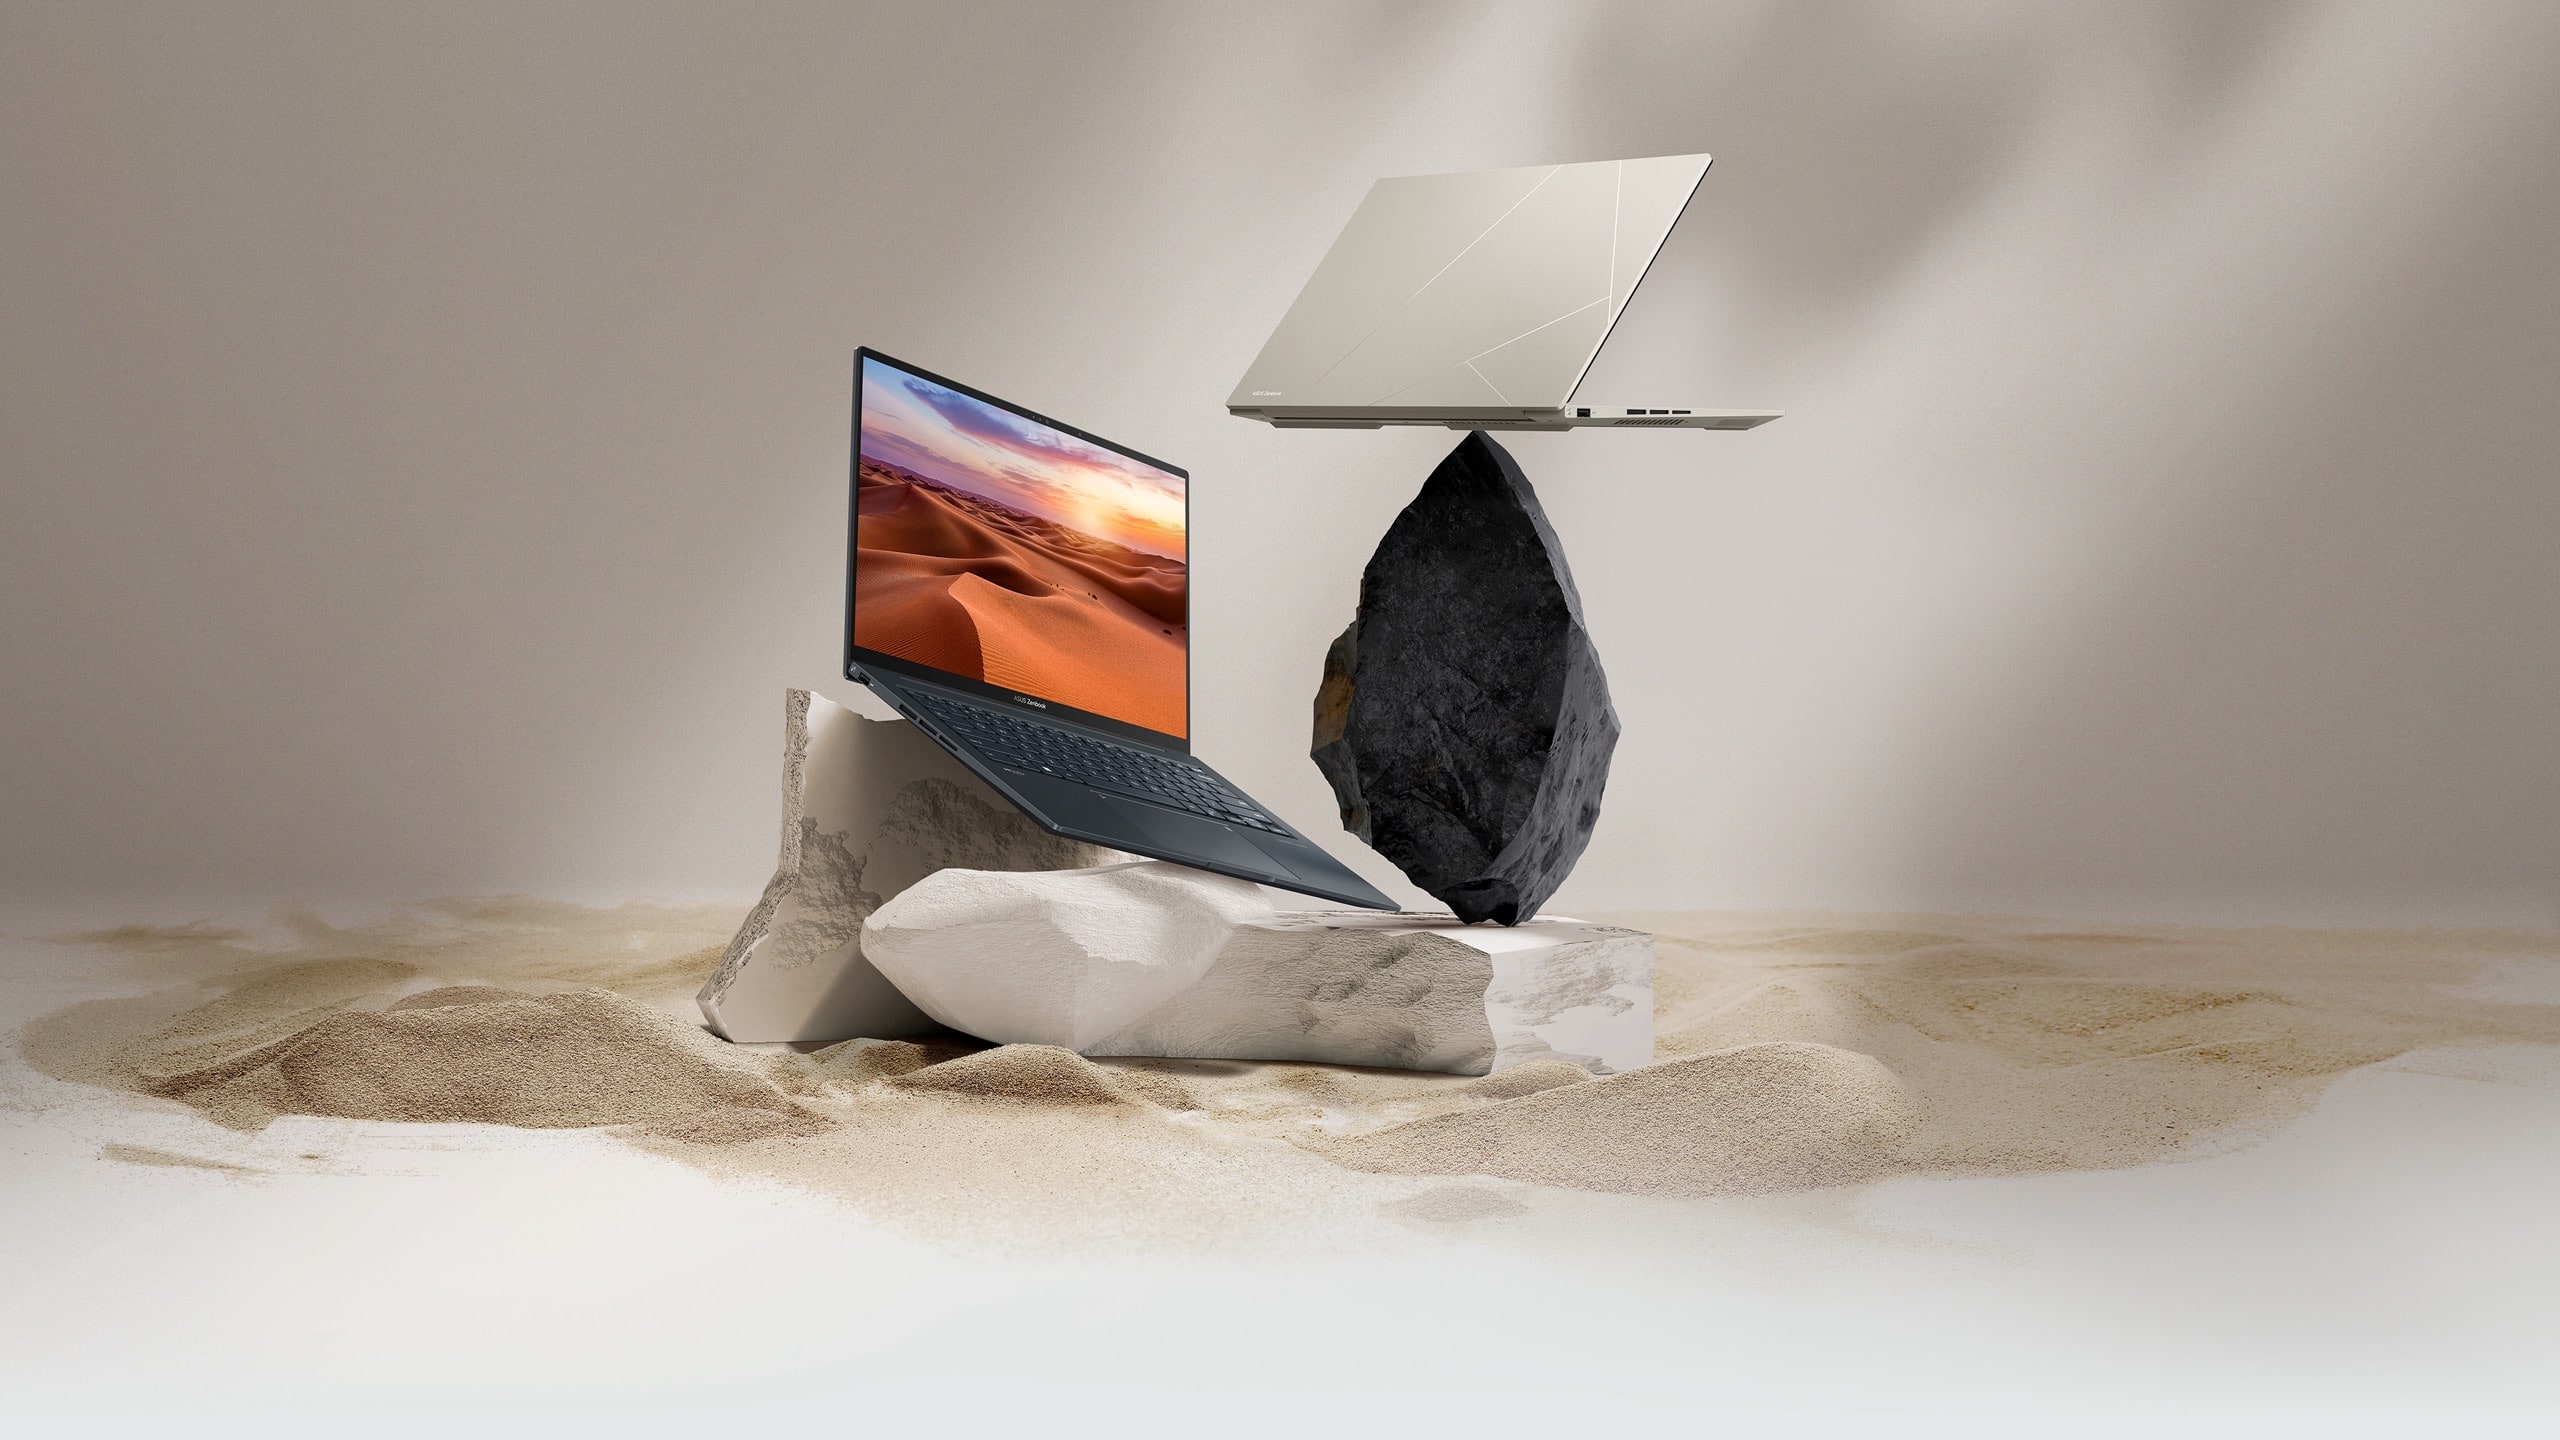 A Đen and a beige Zenbook 14X OLED. The Đen one is wide open on a sandstone rock, and the beige one is seen from behind on a Đen rock.